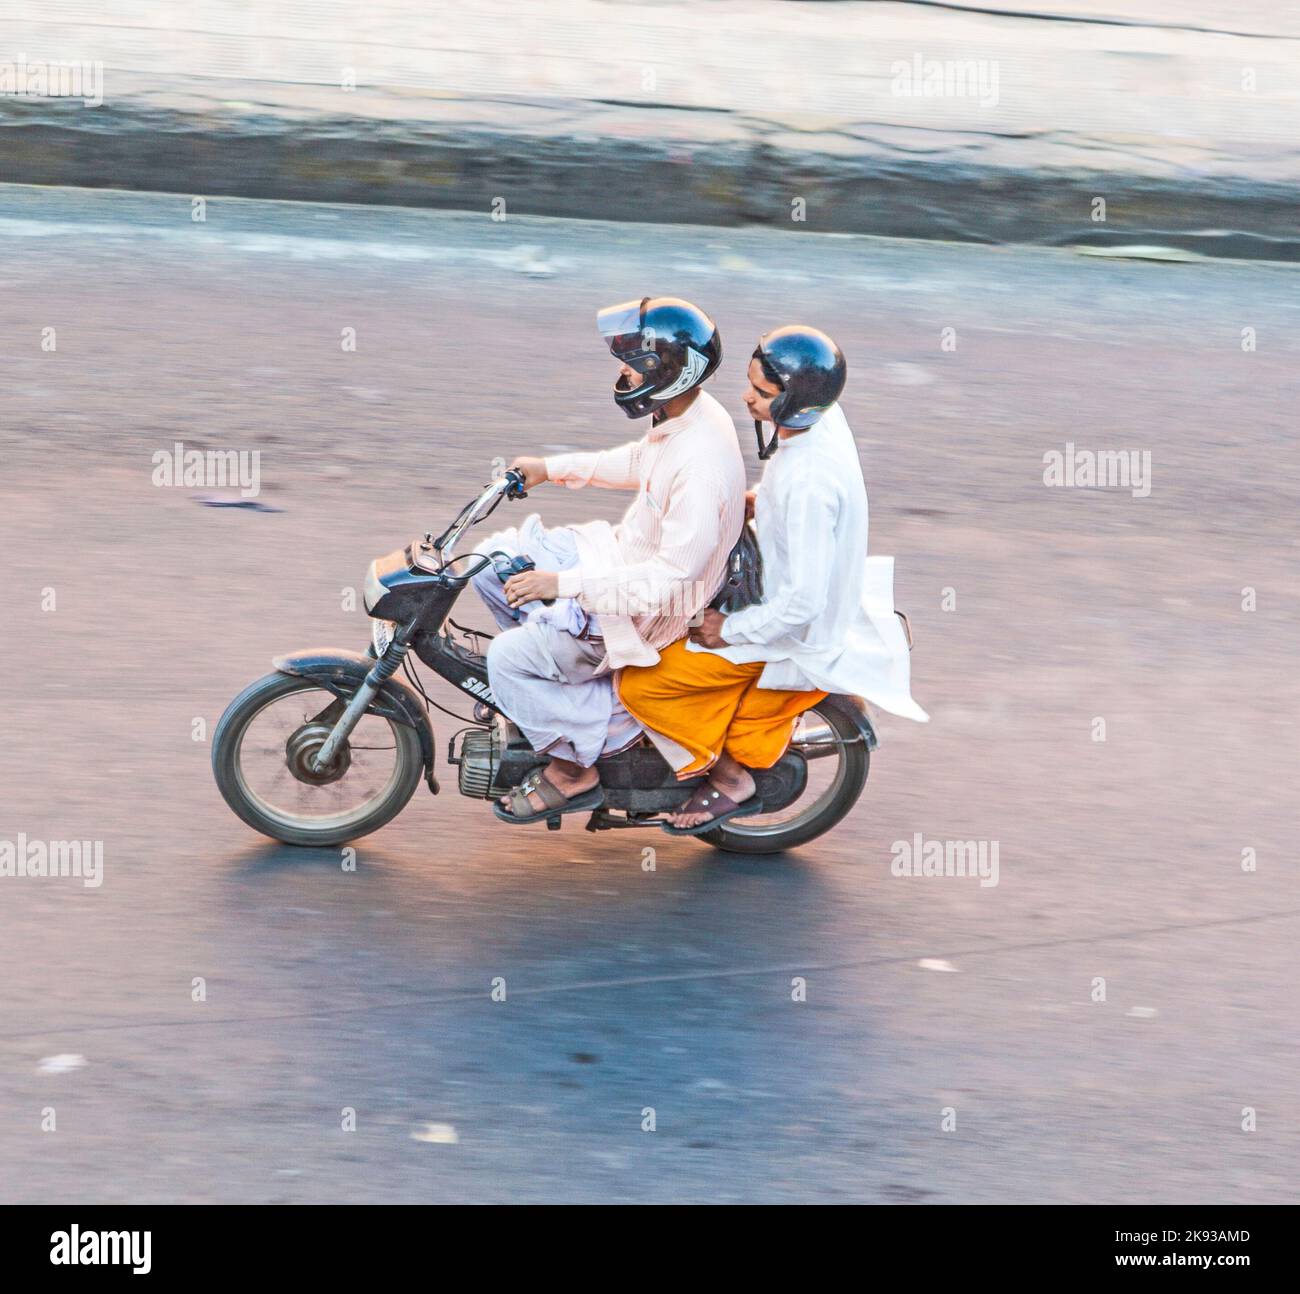 JAIPUR, INDIA - NOV 13, 2011: Two men riding on a bike (blurred motion). Motorbike is the most favorite vehicle and most affordable for India. Stock Photo